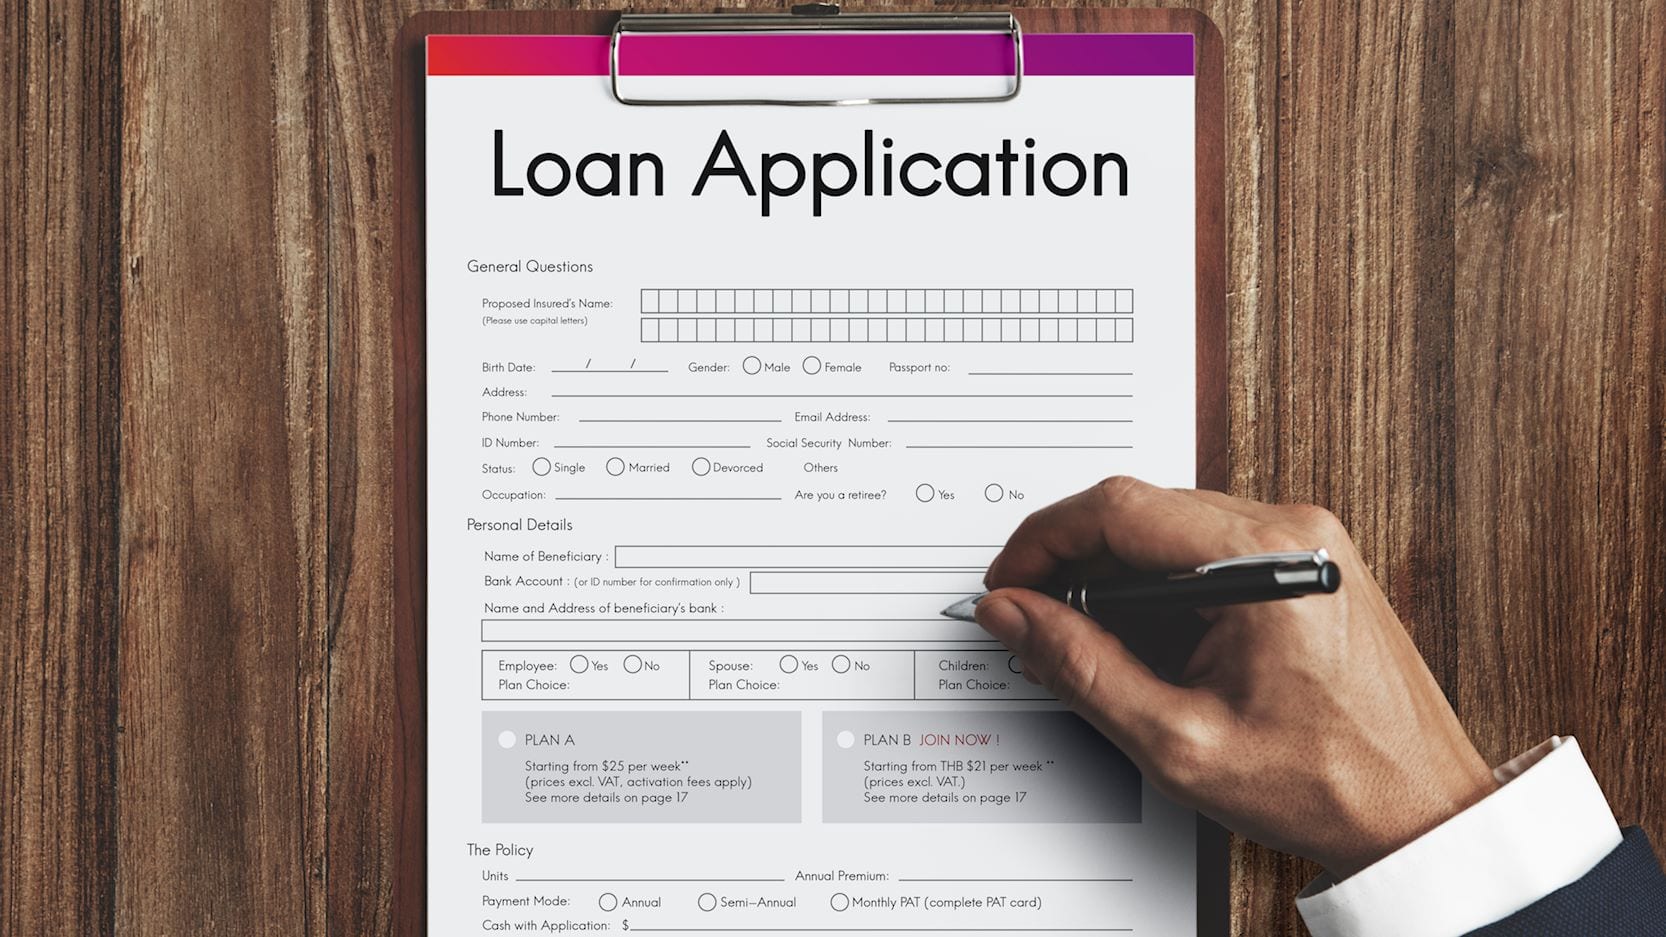 Prequalify For Personal Loan Without Hurting Credit: How To Guide